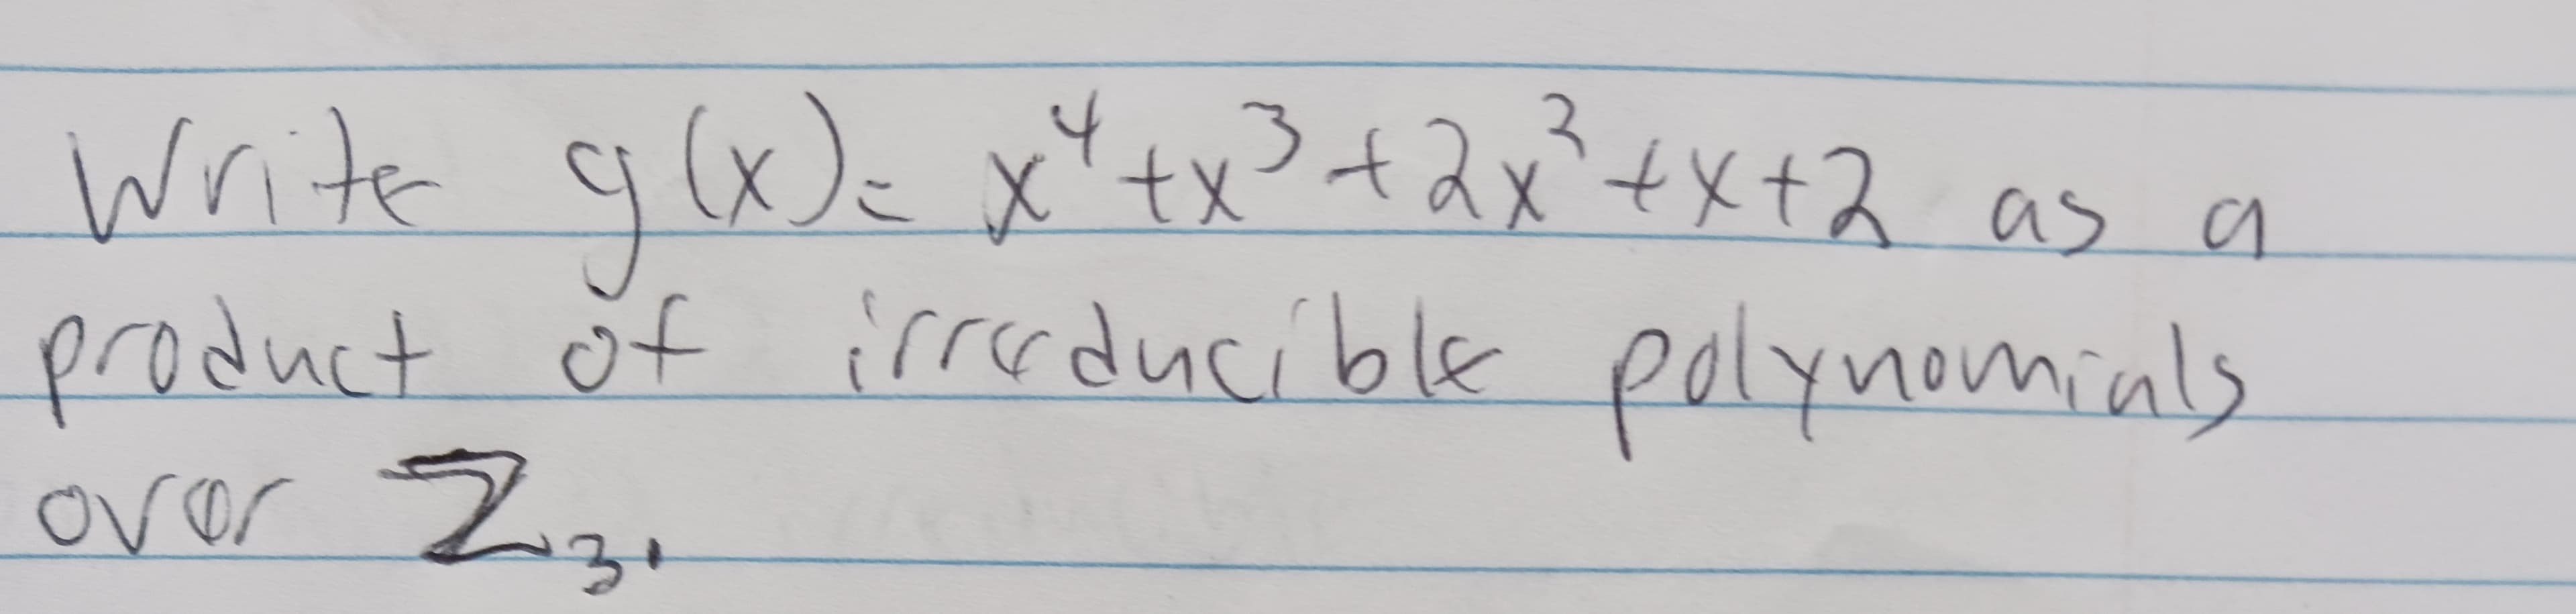 Write g(x) = x²+x²³ + 2x² + x +2
as a
product of irreducible polynomials
over 2.₂.
за